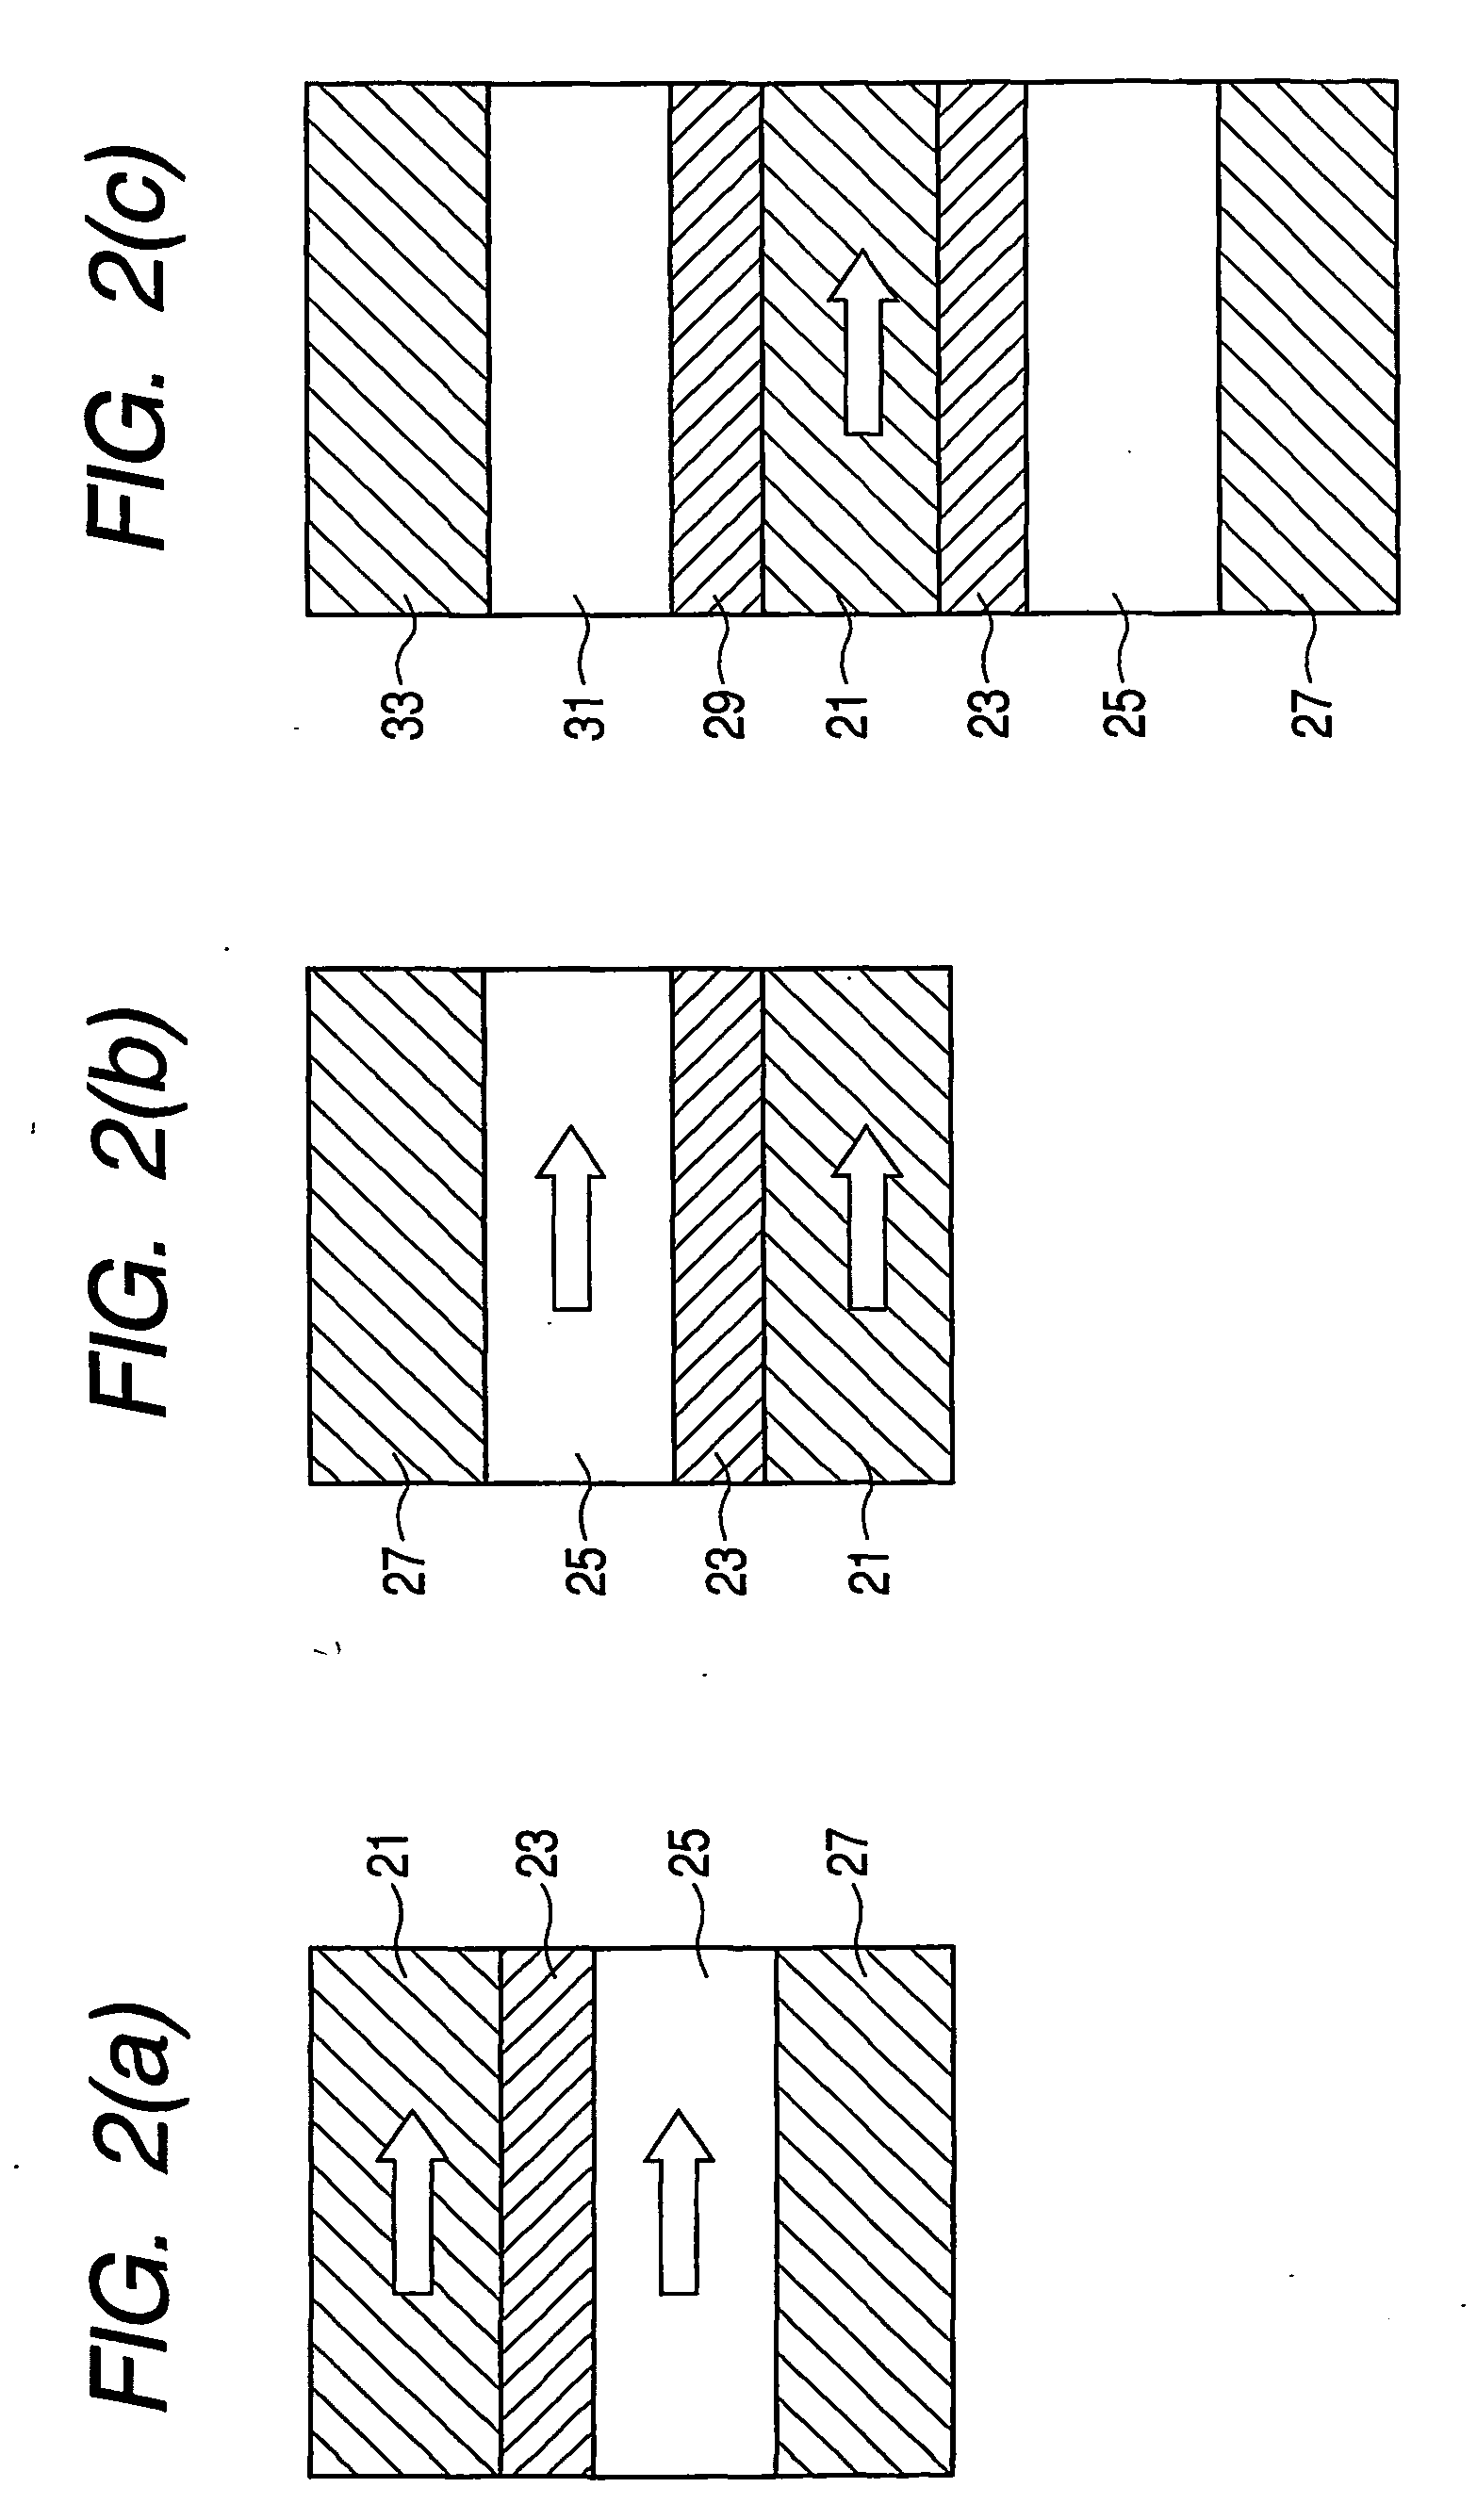 Composite free layer for stabilizing magnetoresistive head